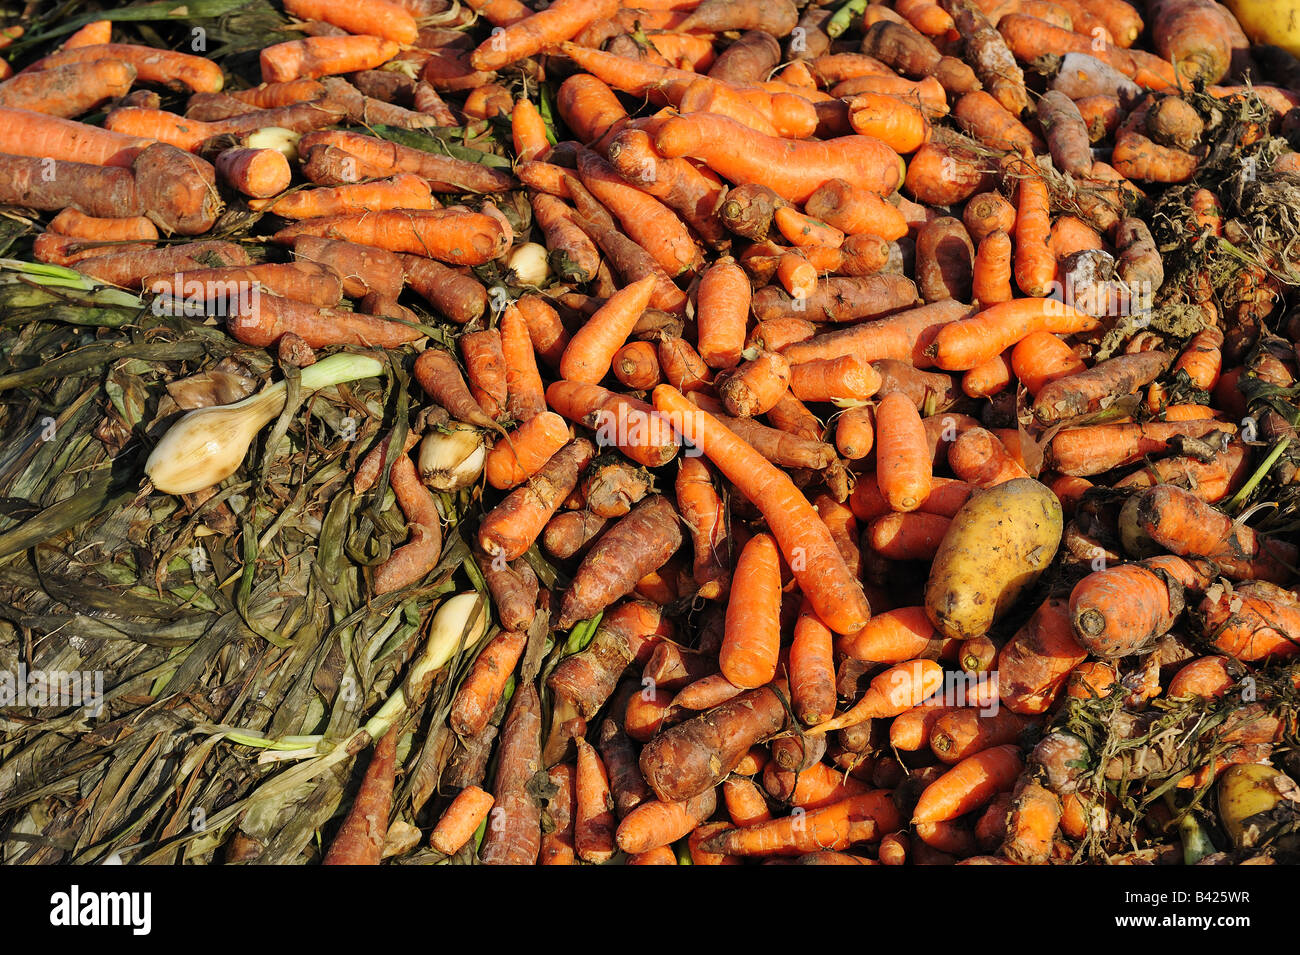 Waste vegetables Stock Photo